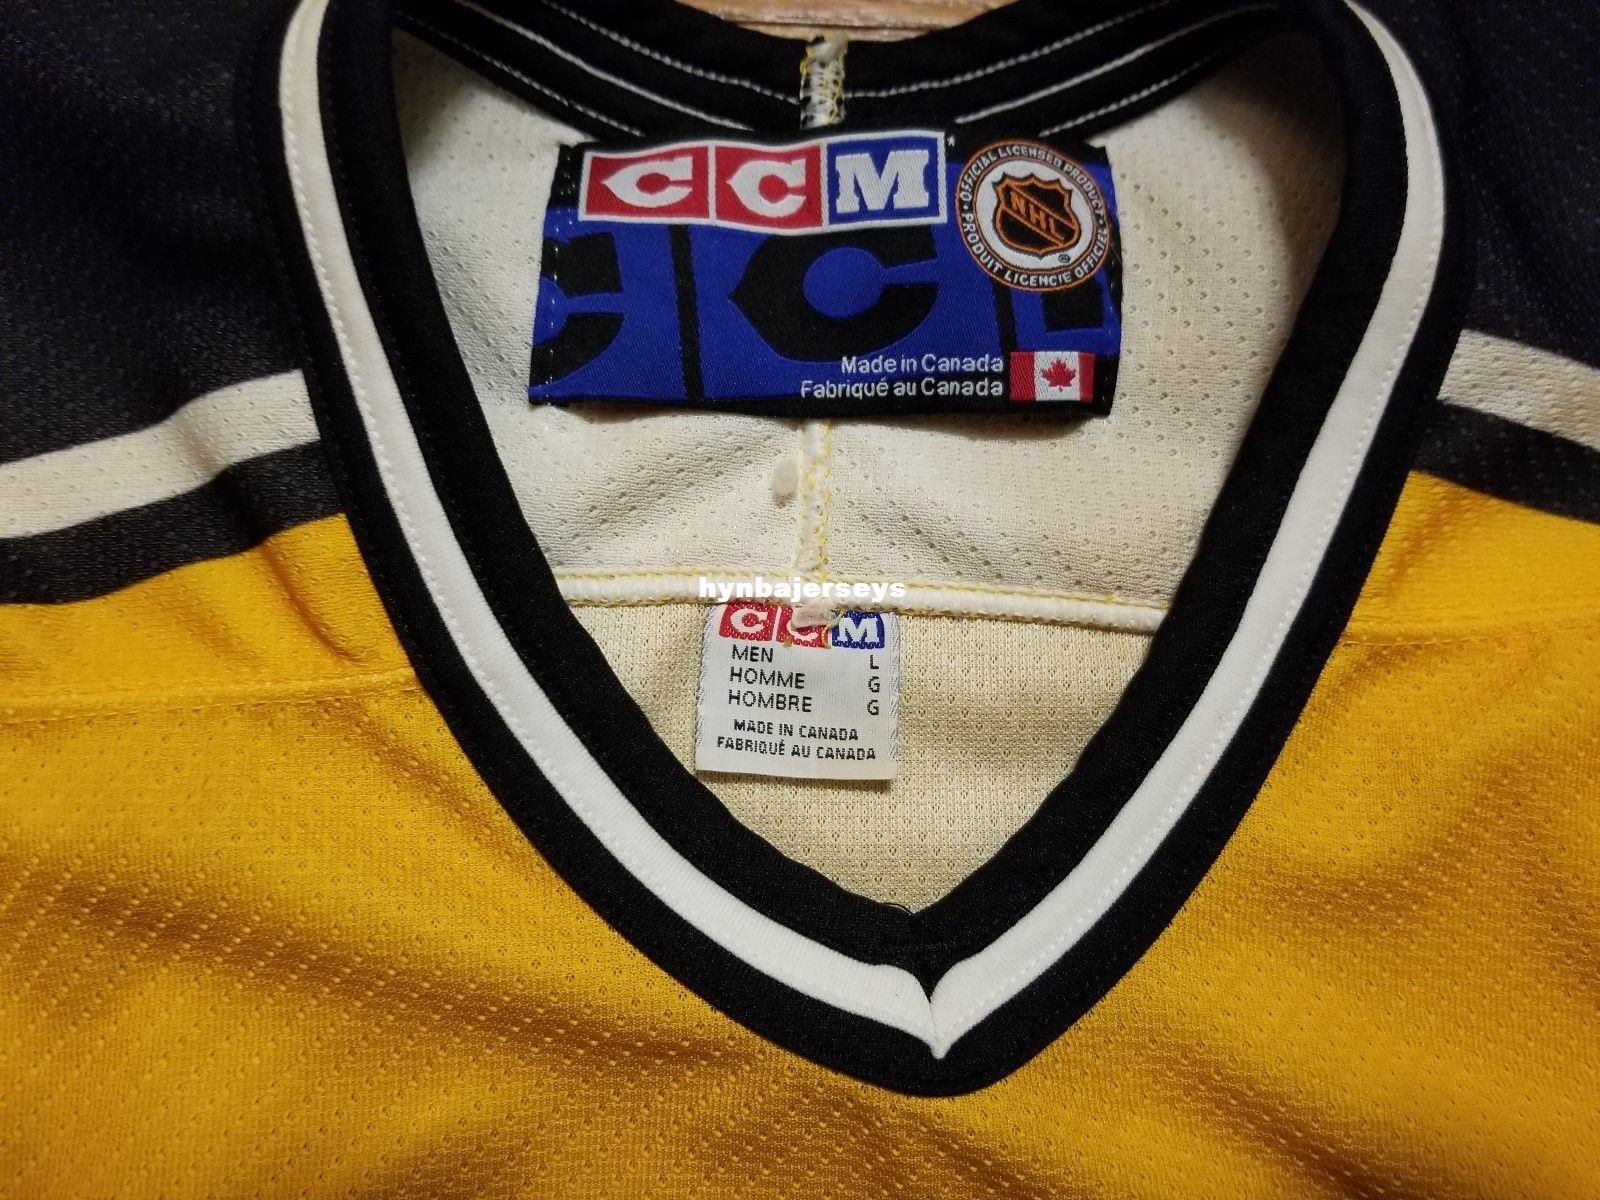 FS: CCM Boston Bruins Pooh bear third jersey. Size Large and in